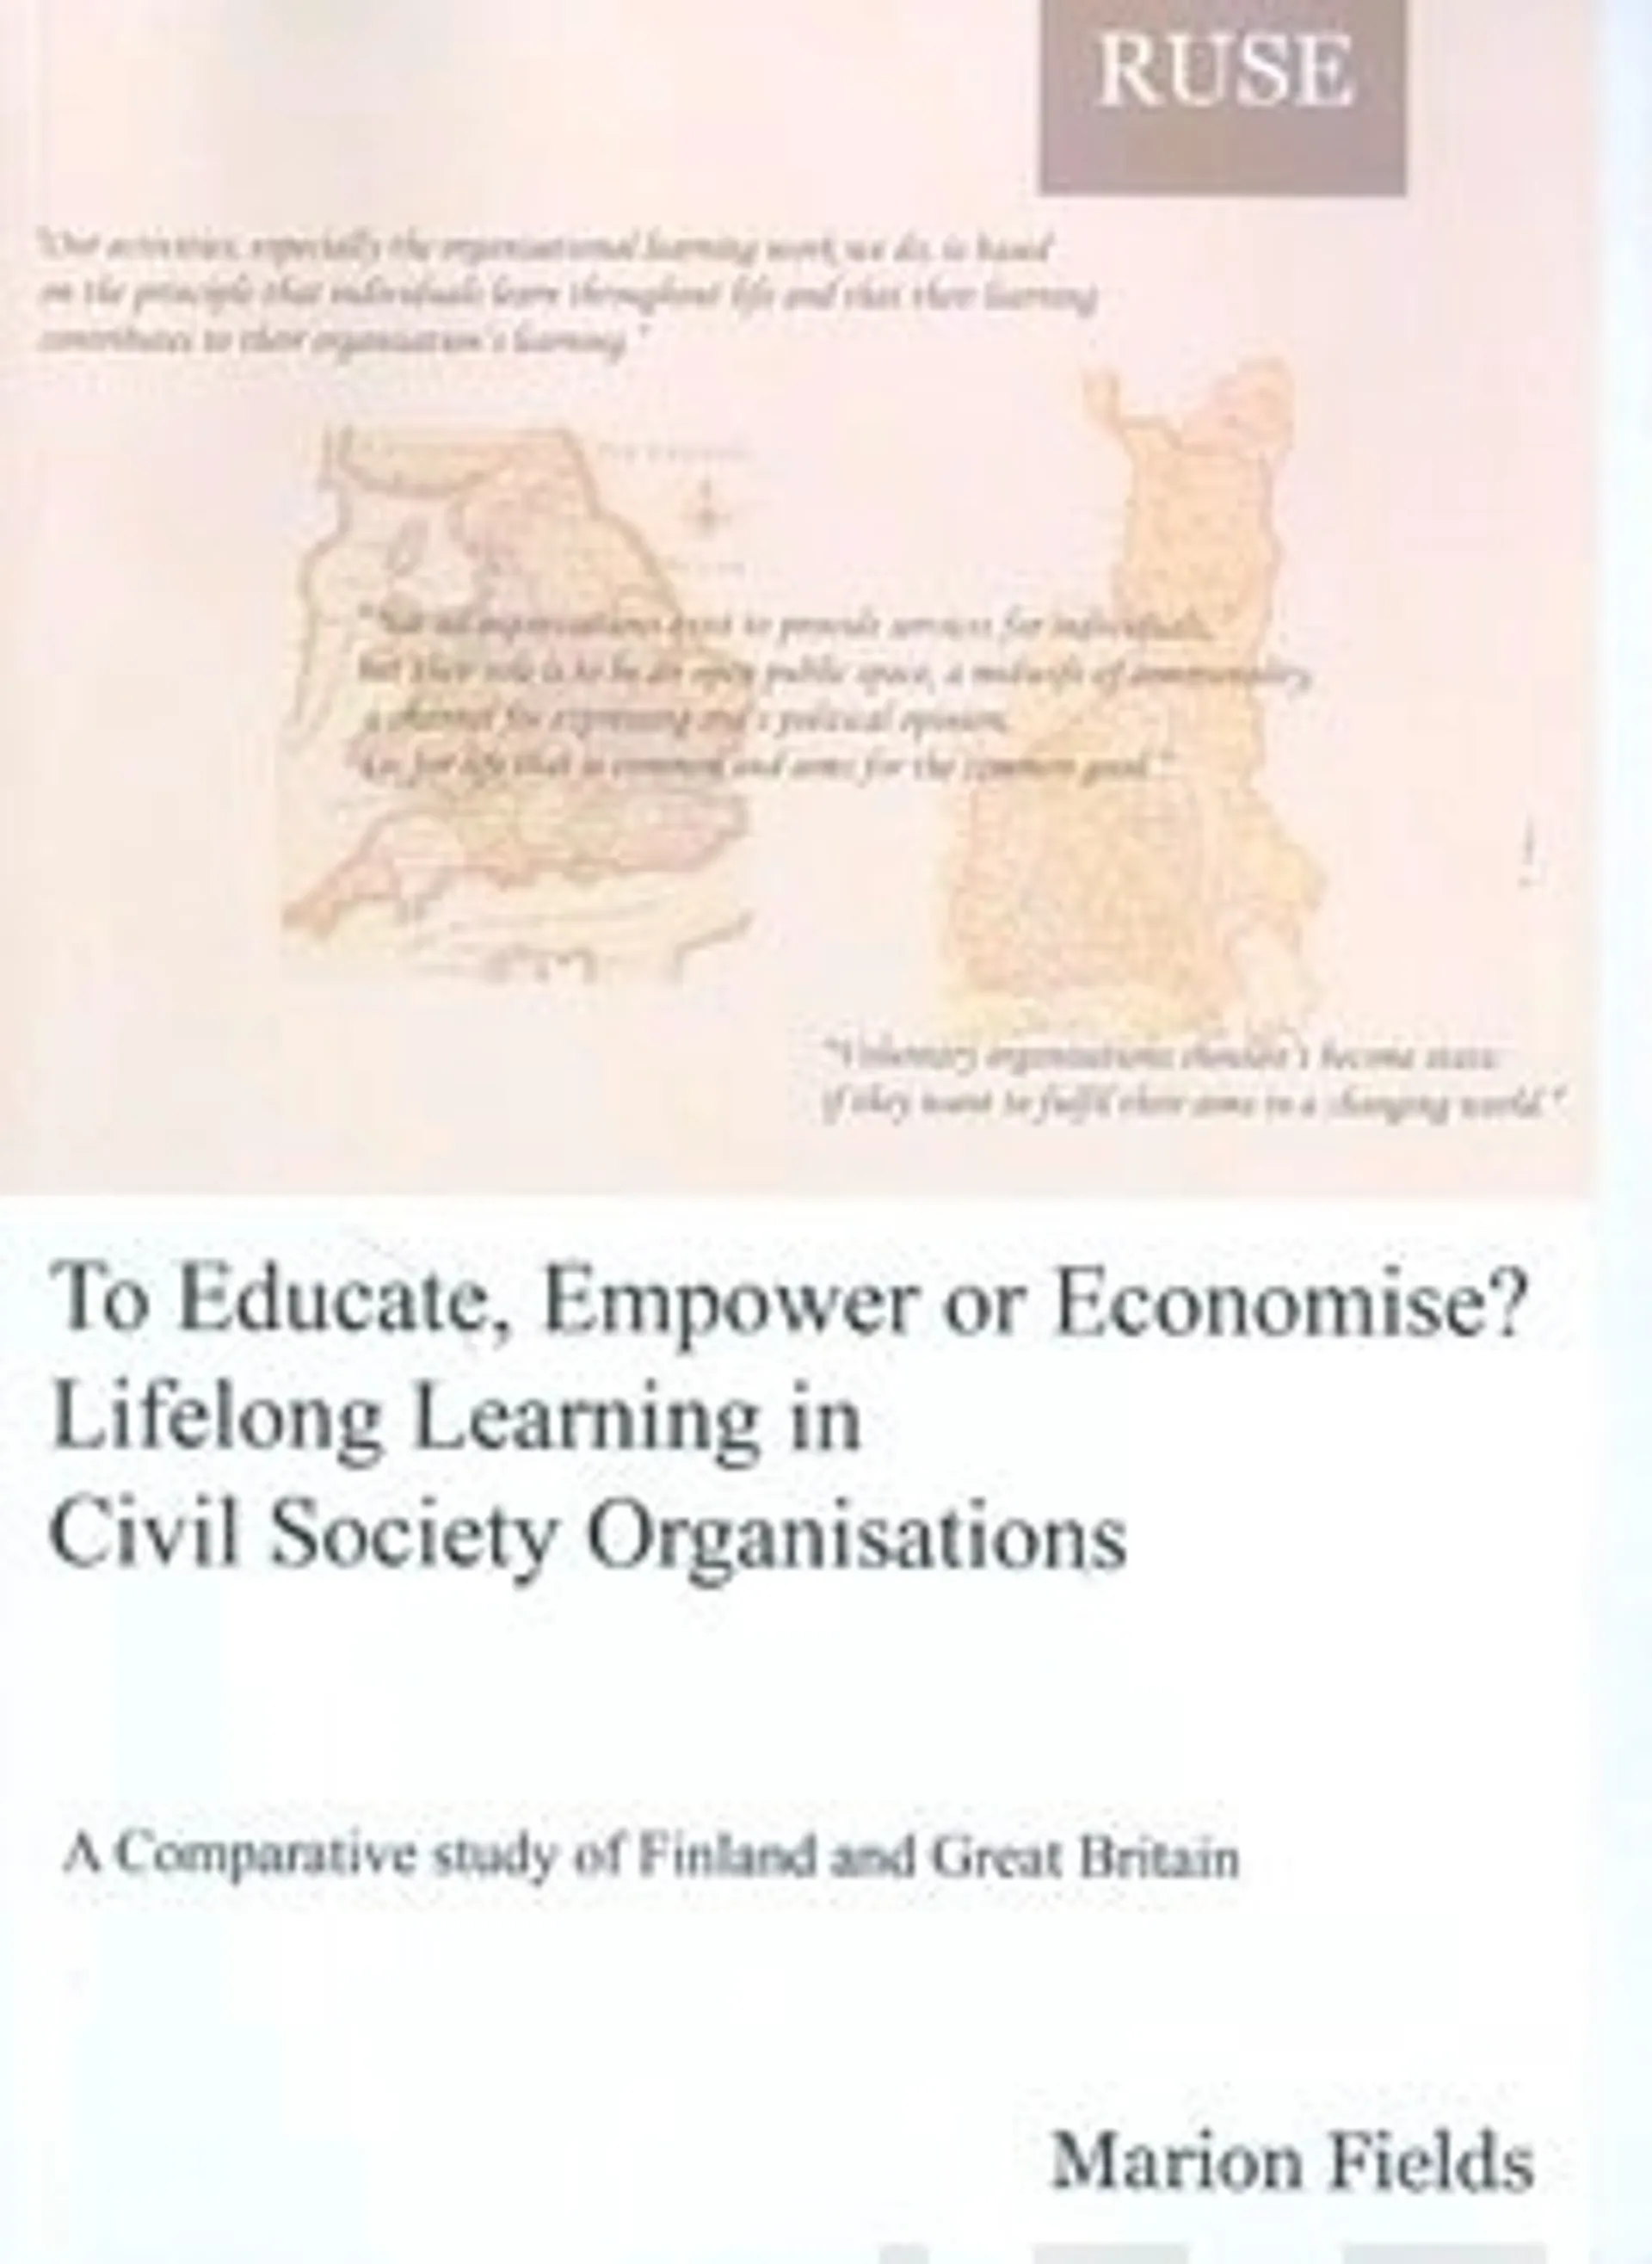 To educate, empower or economise?